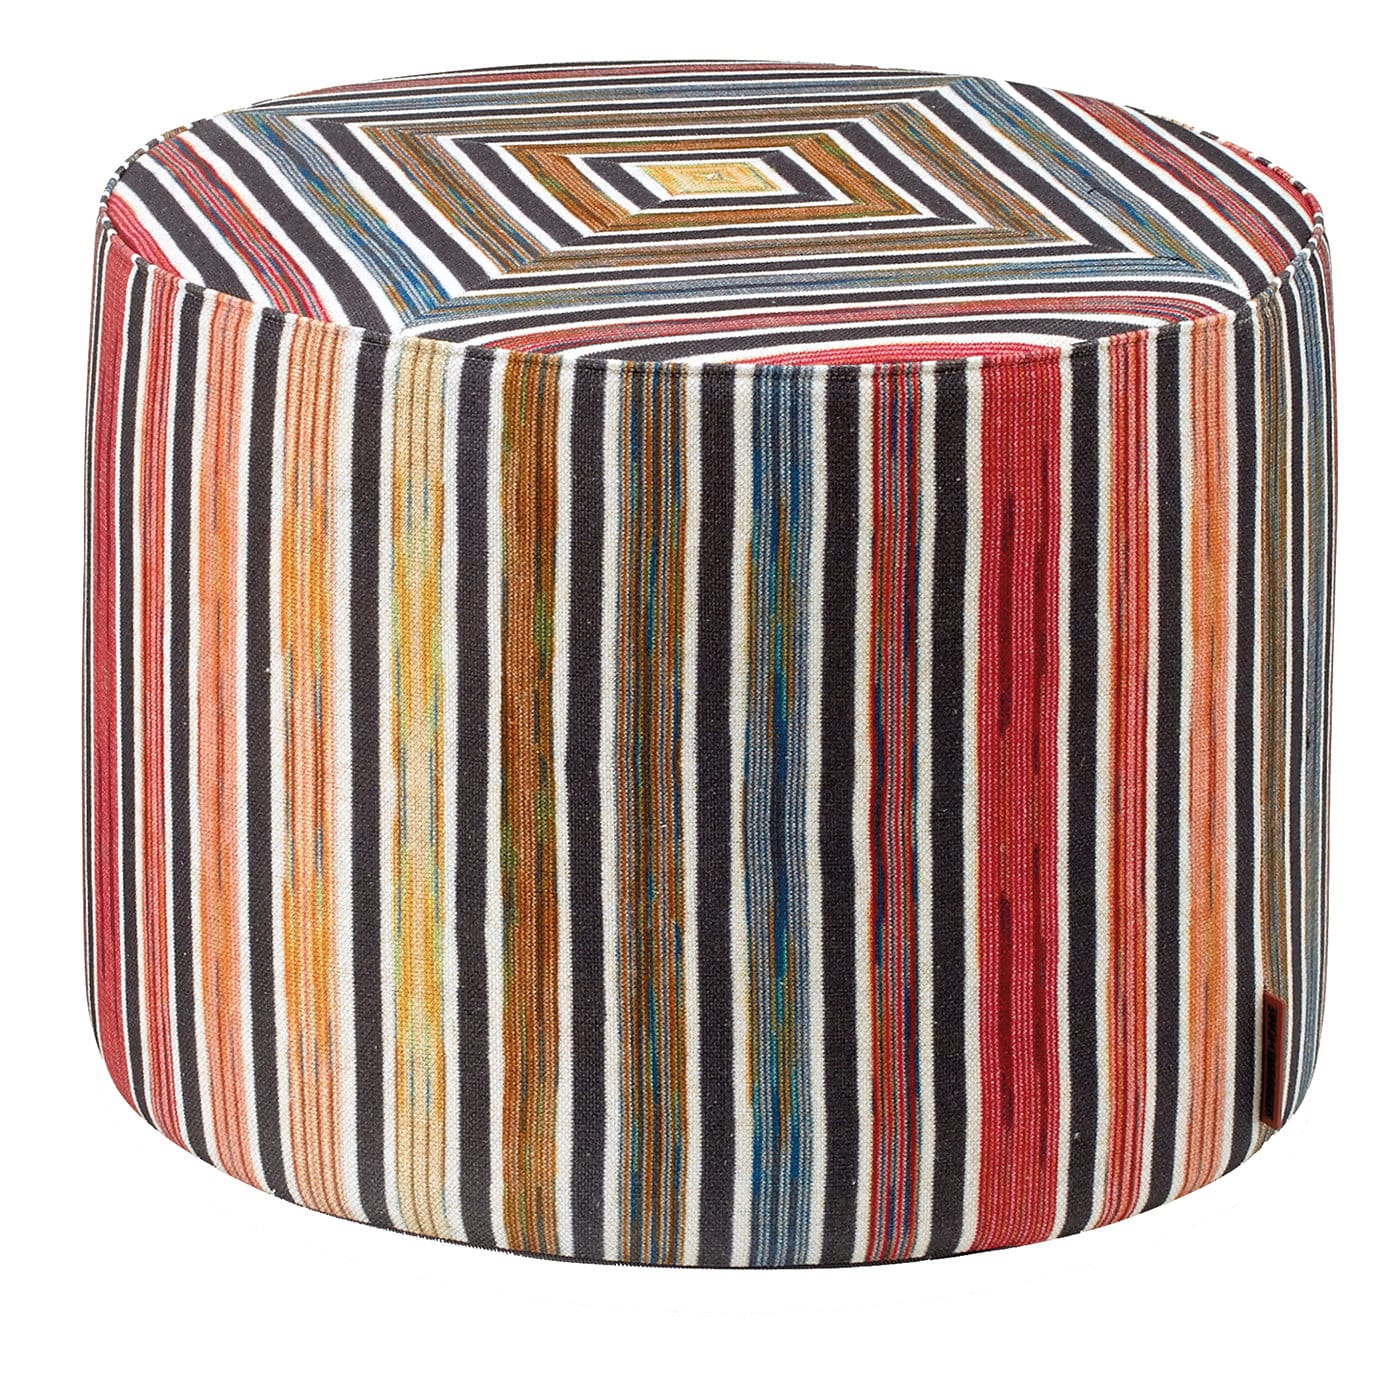 ICONIC FR ANNAPOLIS CYLINDER POUF - Missoni Home Collection